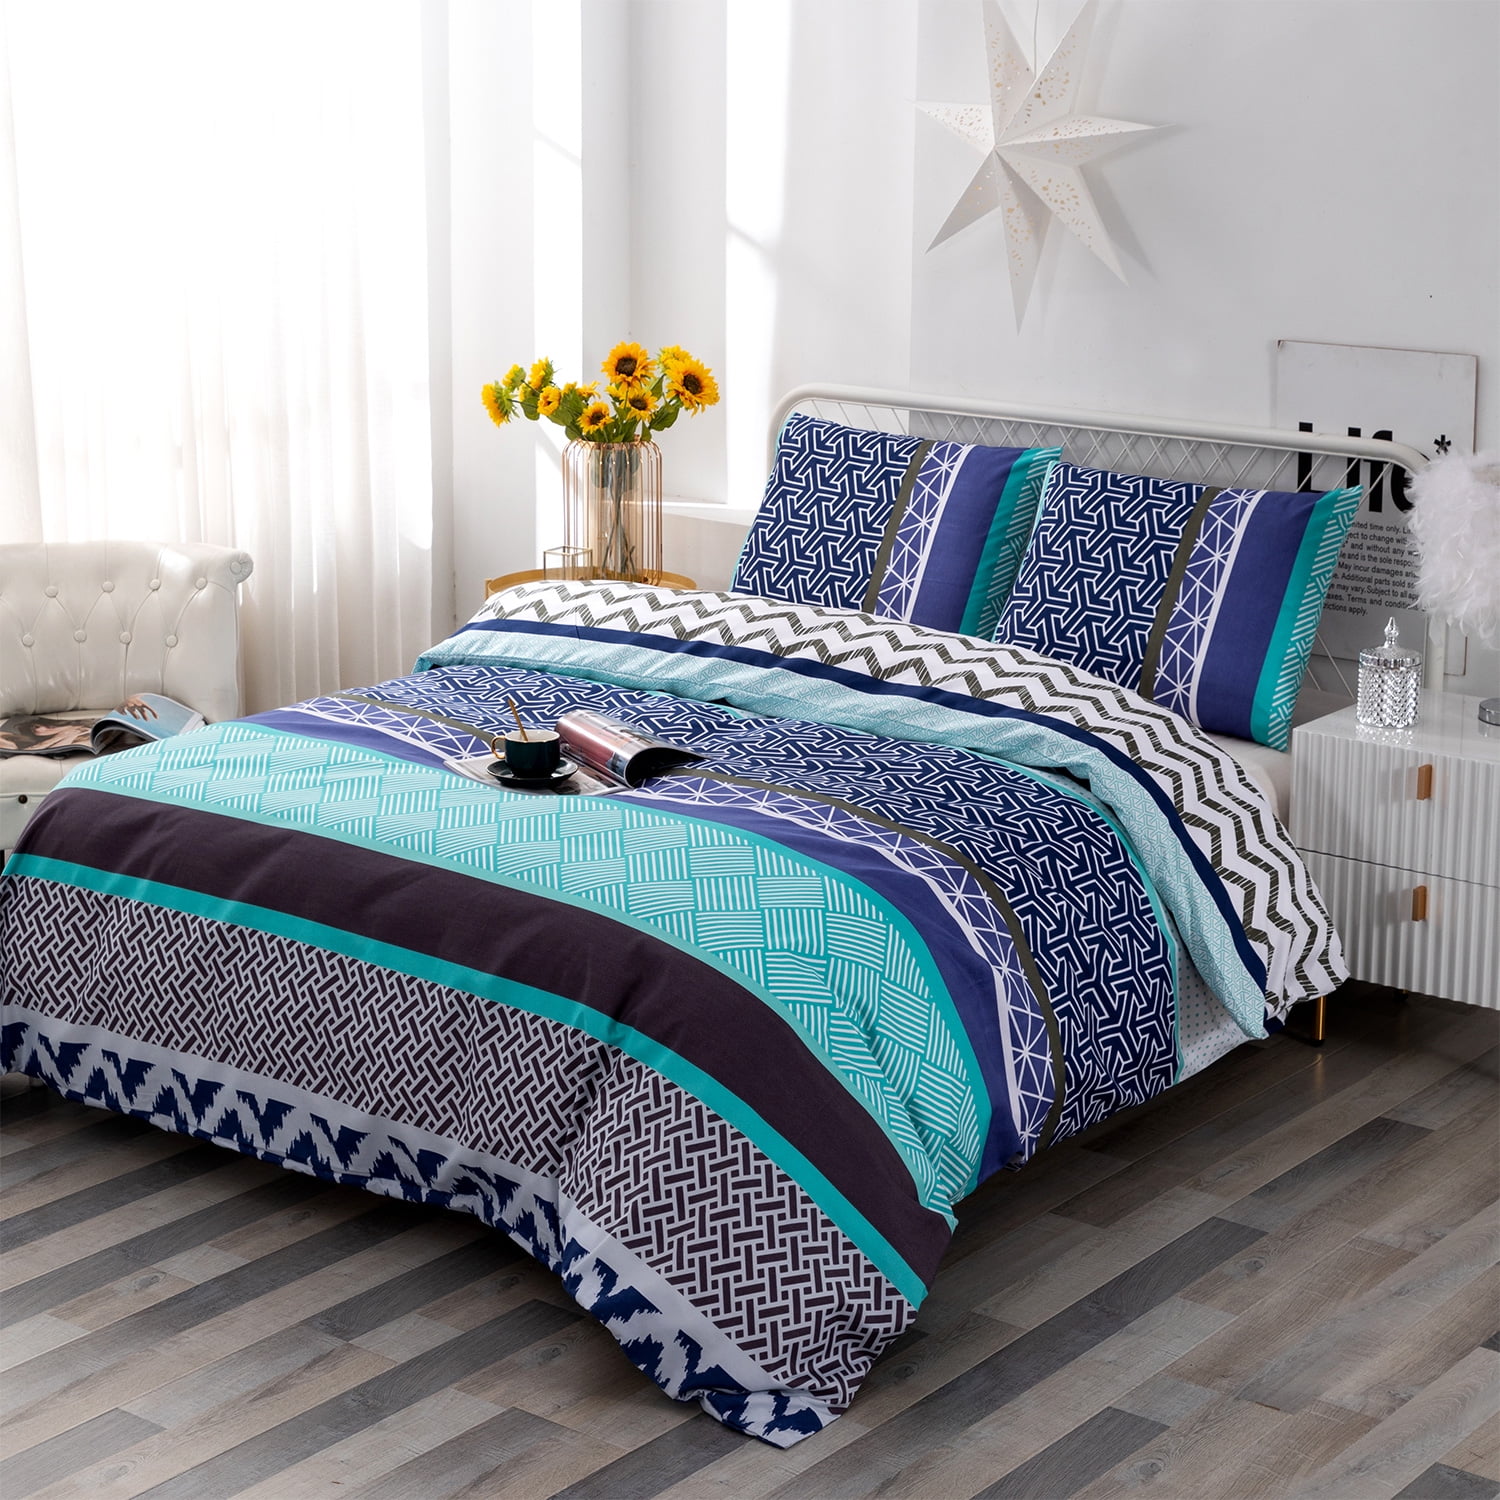 3-Piece Luxury Duvet Cover Set,2 Sides Printed Bedset Skyblue &Mint